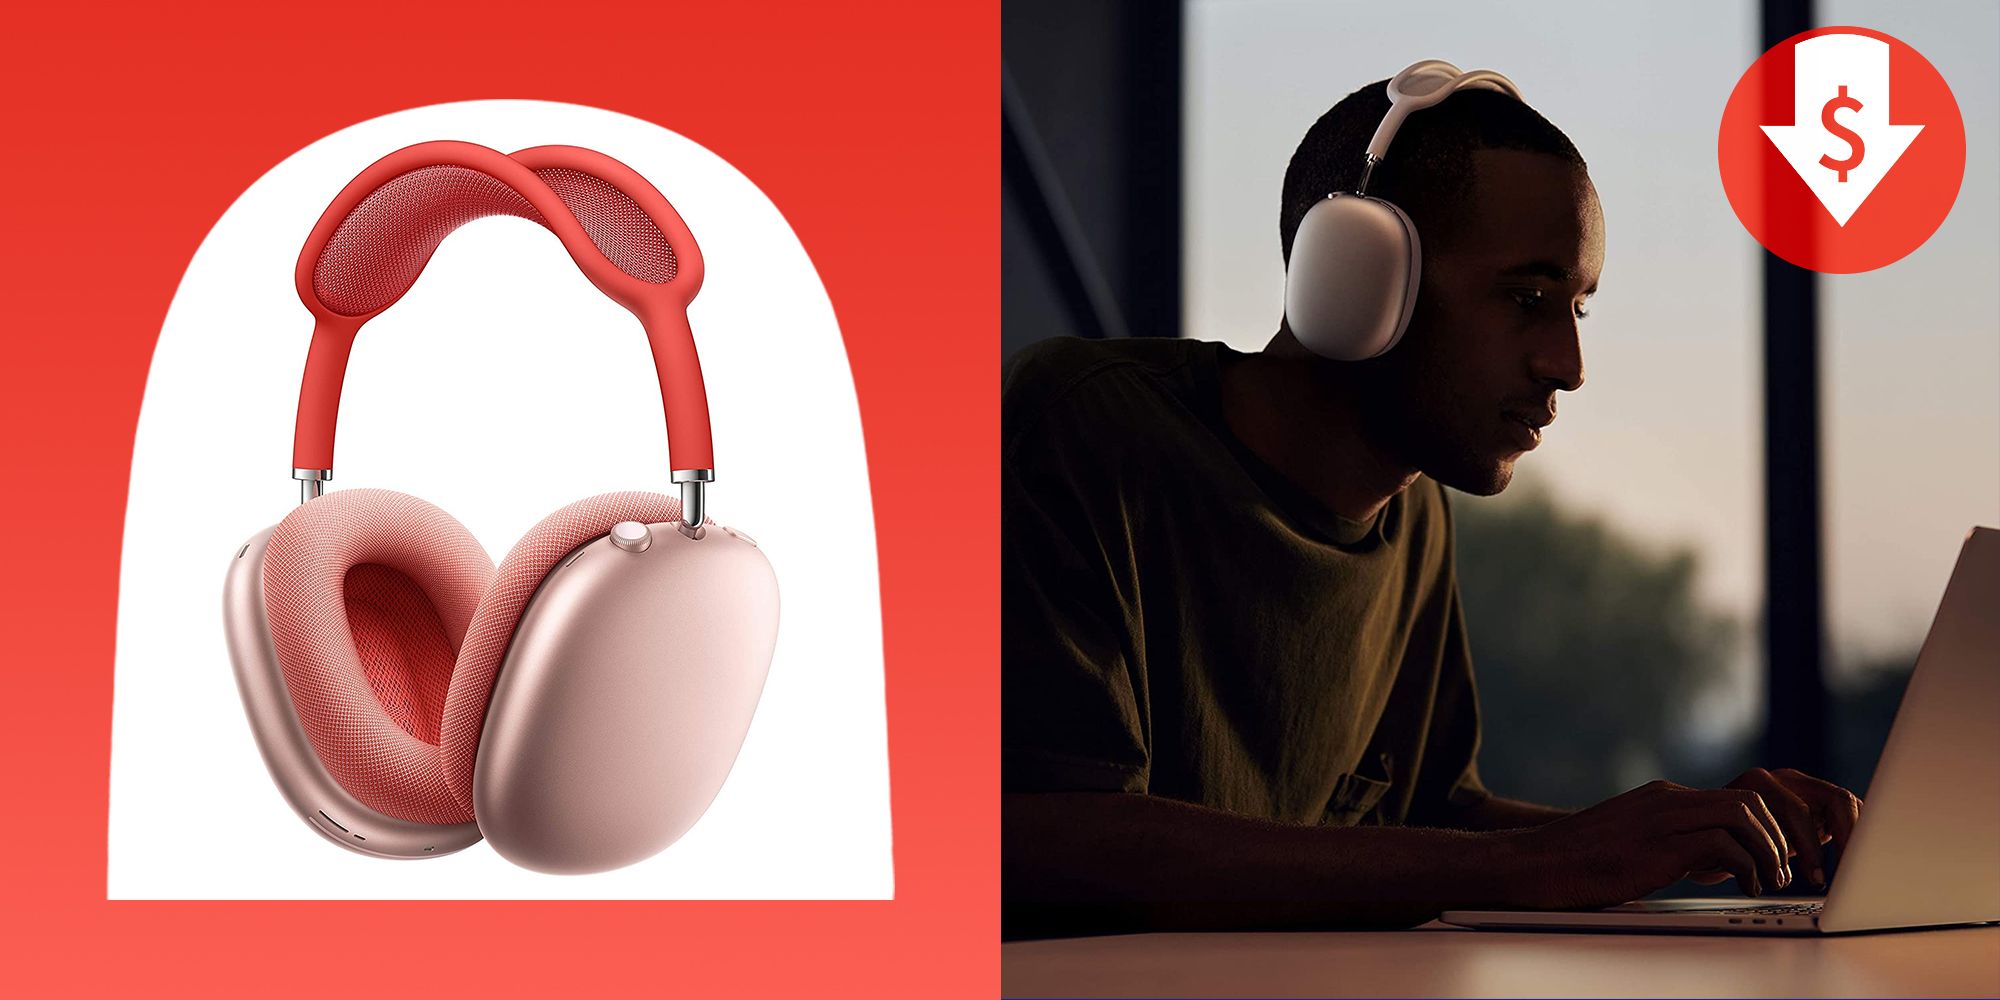 Best AirPods Deals: Save Up to $45 on Beats, AirPods 2 and AirPods Max -  CNET